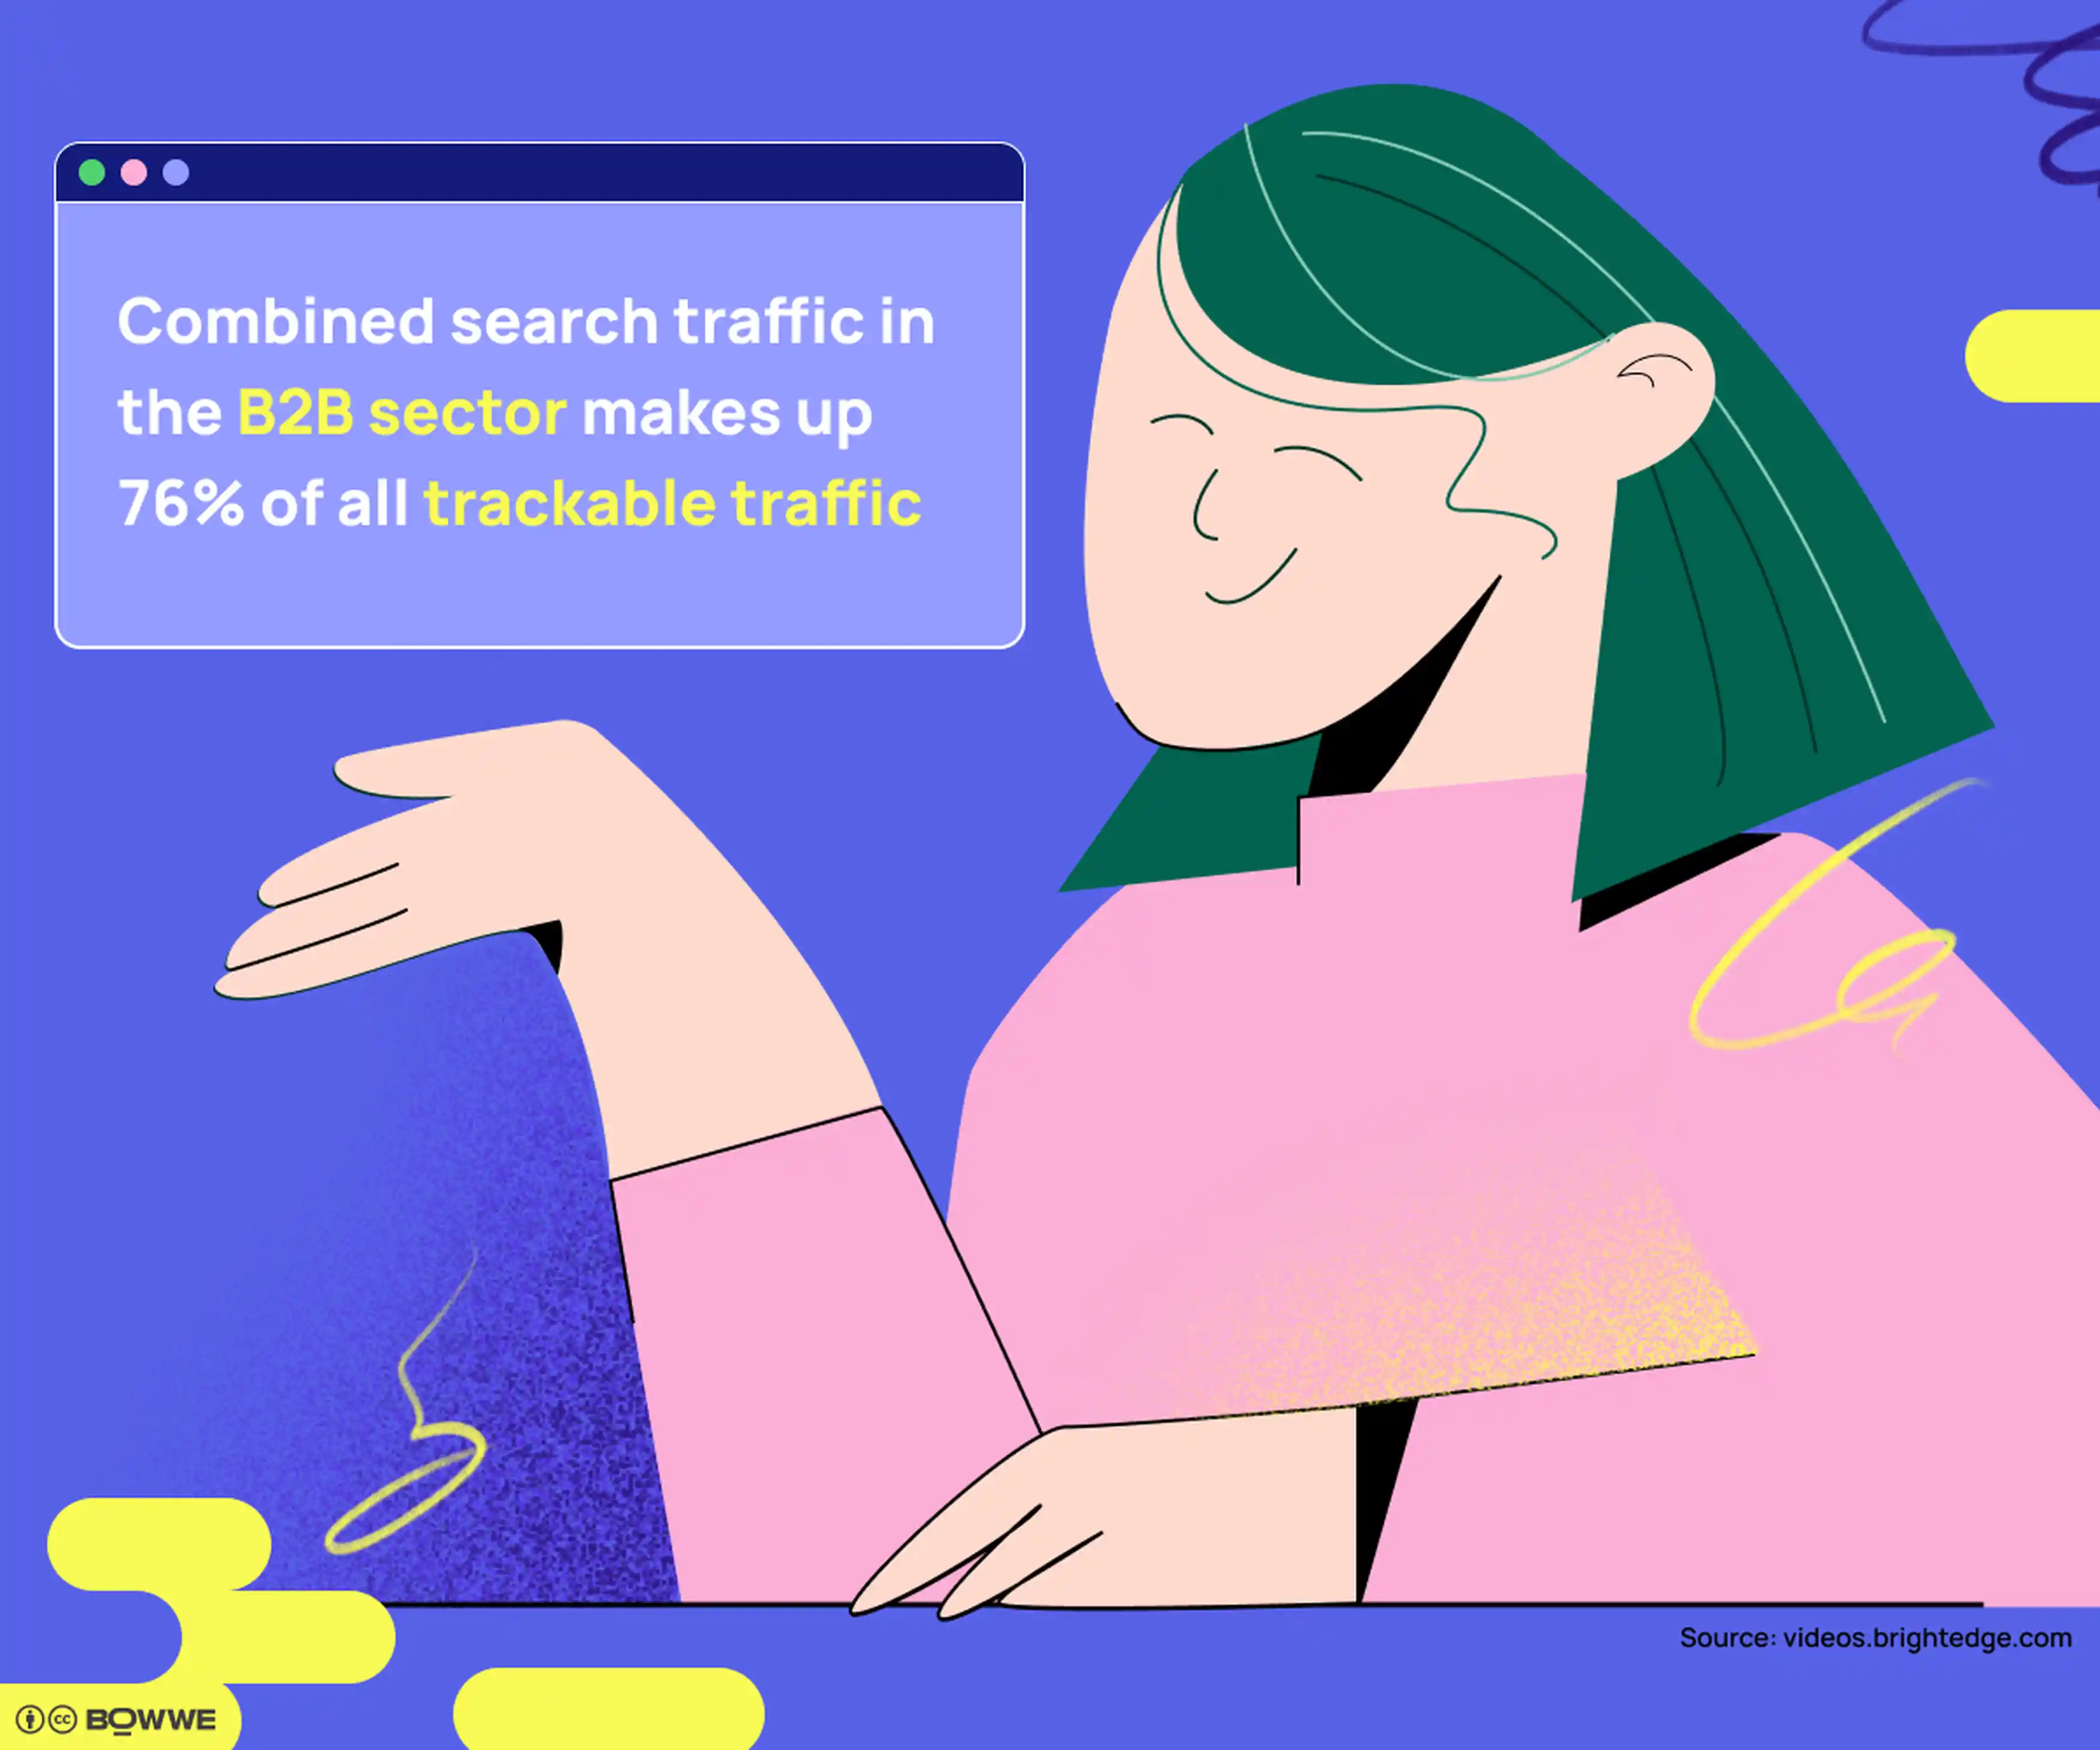 Graphics with a purple background on which there is an image of a man with an upward arrow. The headline reads "Combined search traffic in the B2B sector makes up to 76% of all trackable traffic".